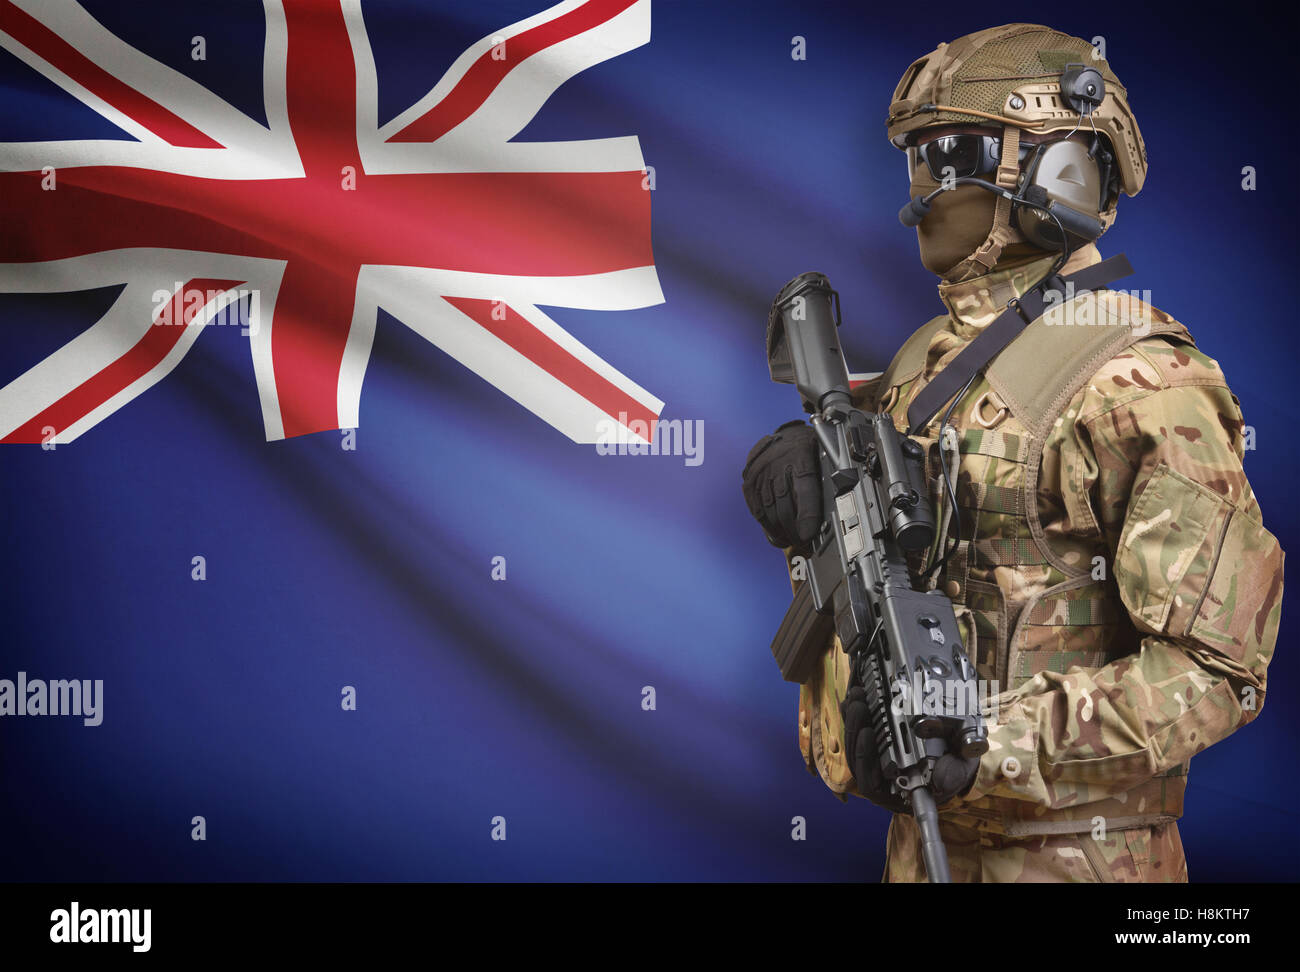 Soldier in helmet holding machine gun with national flag on background - New Zealand Stock Photo